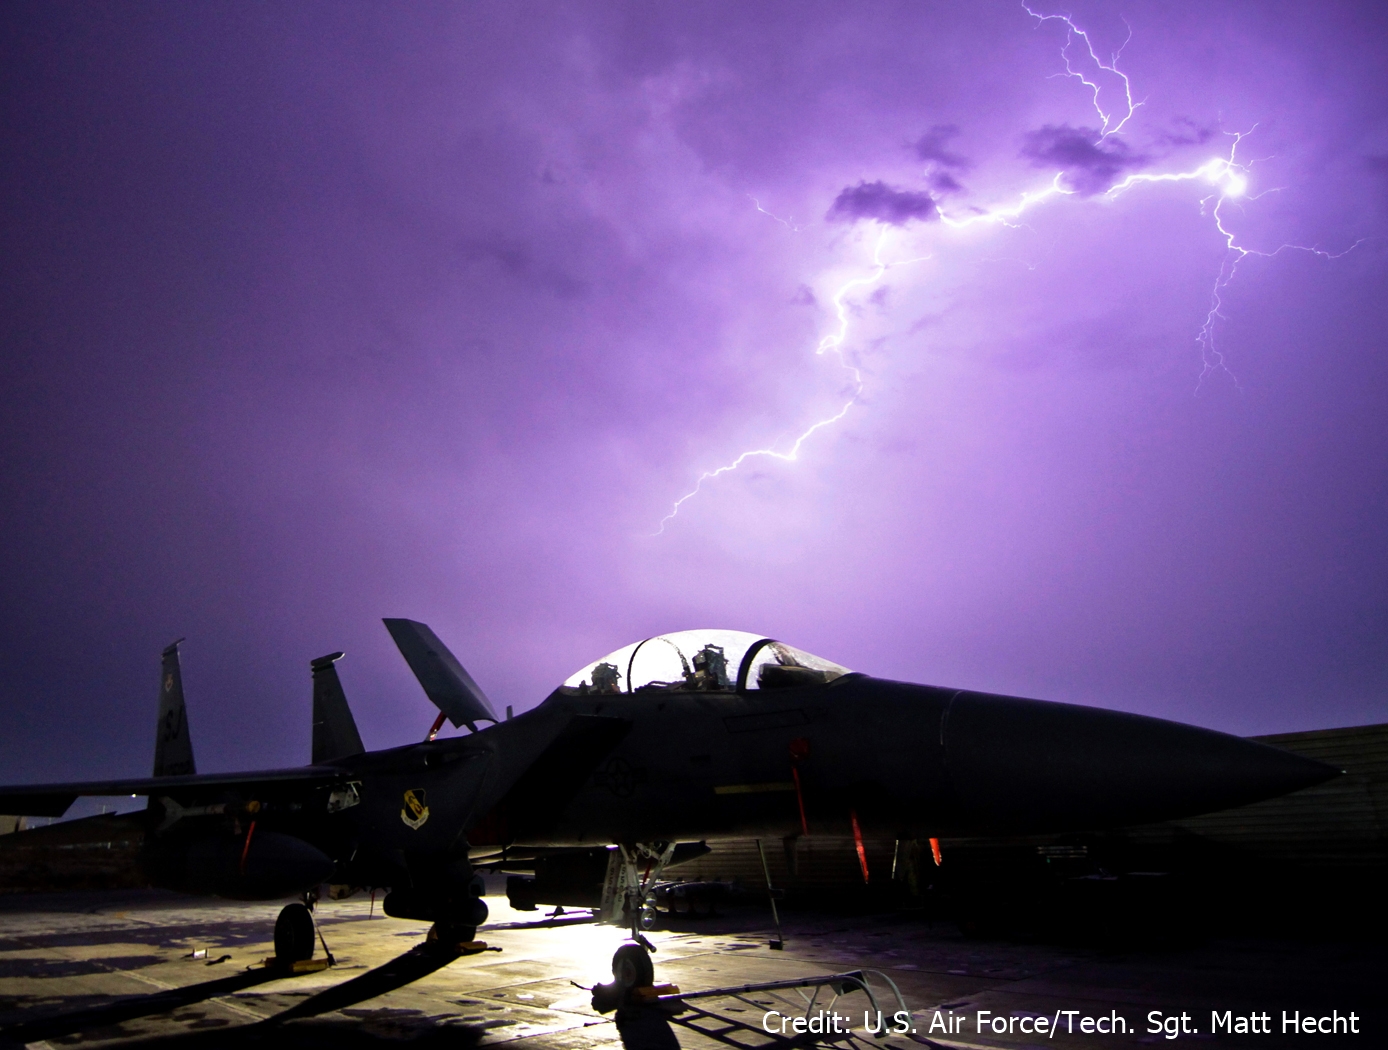 aircraft in front of lightning storm